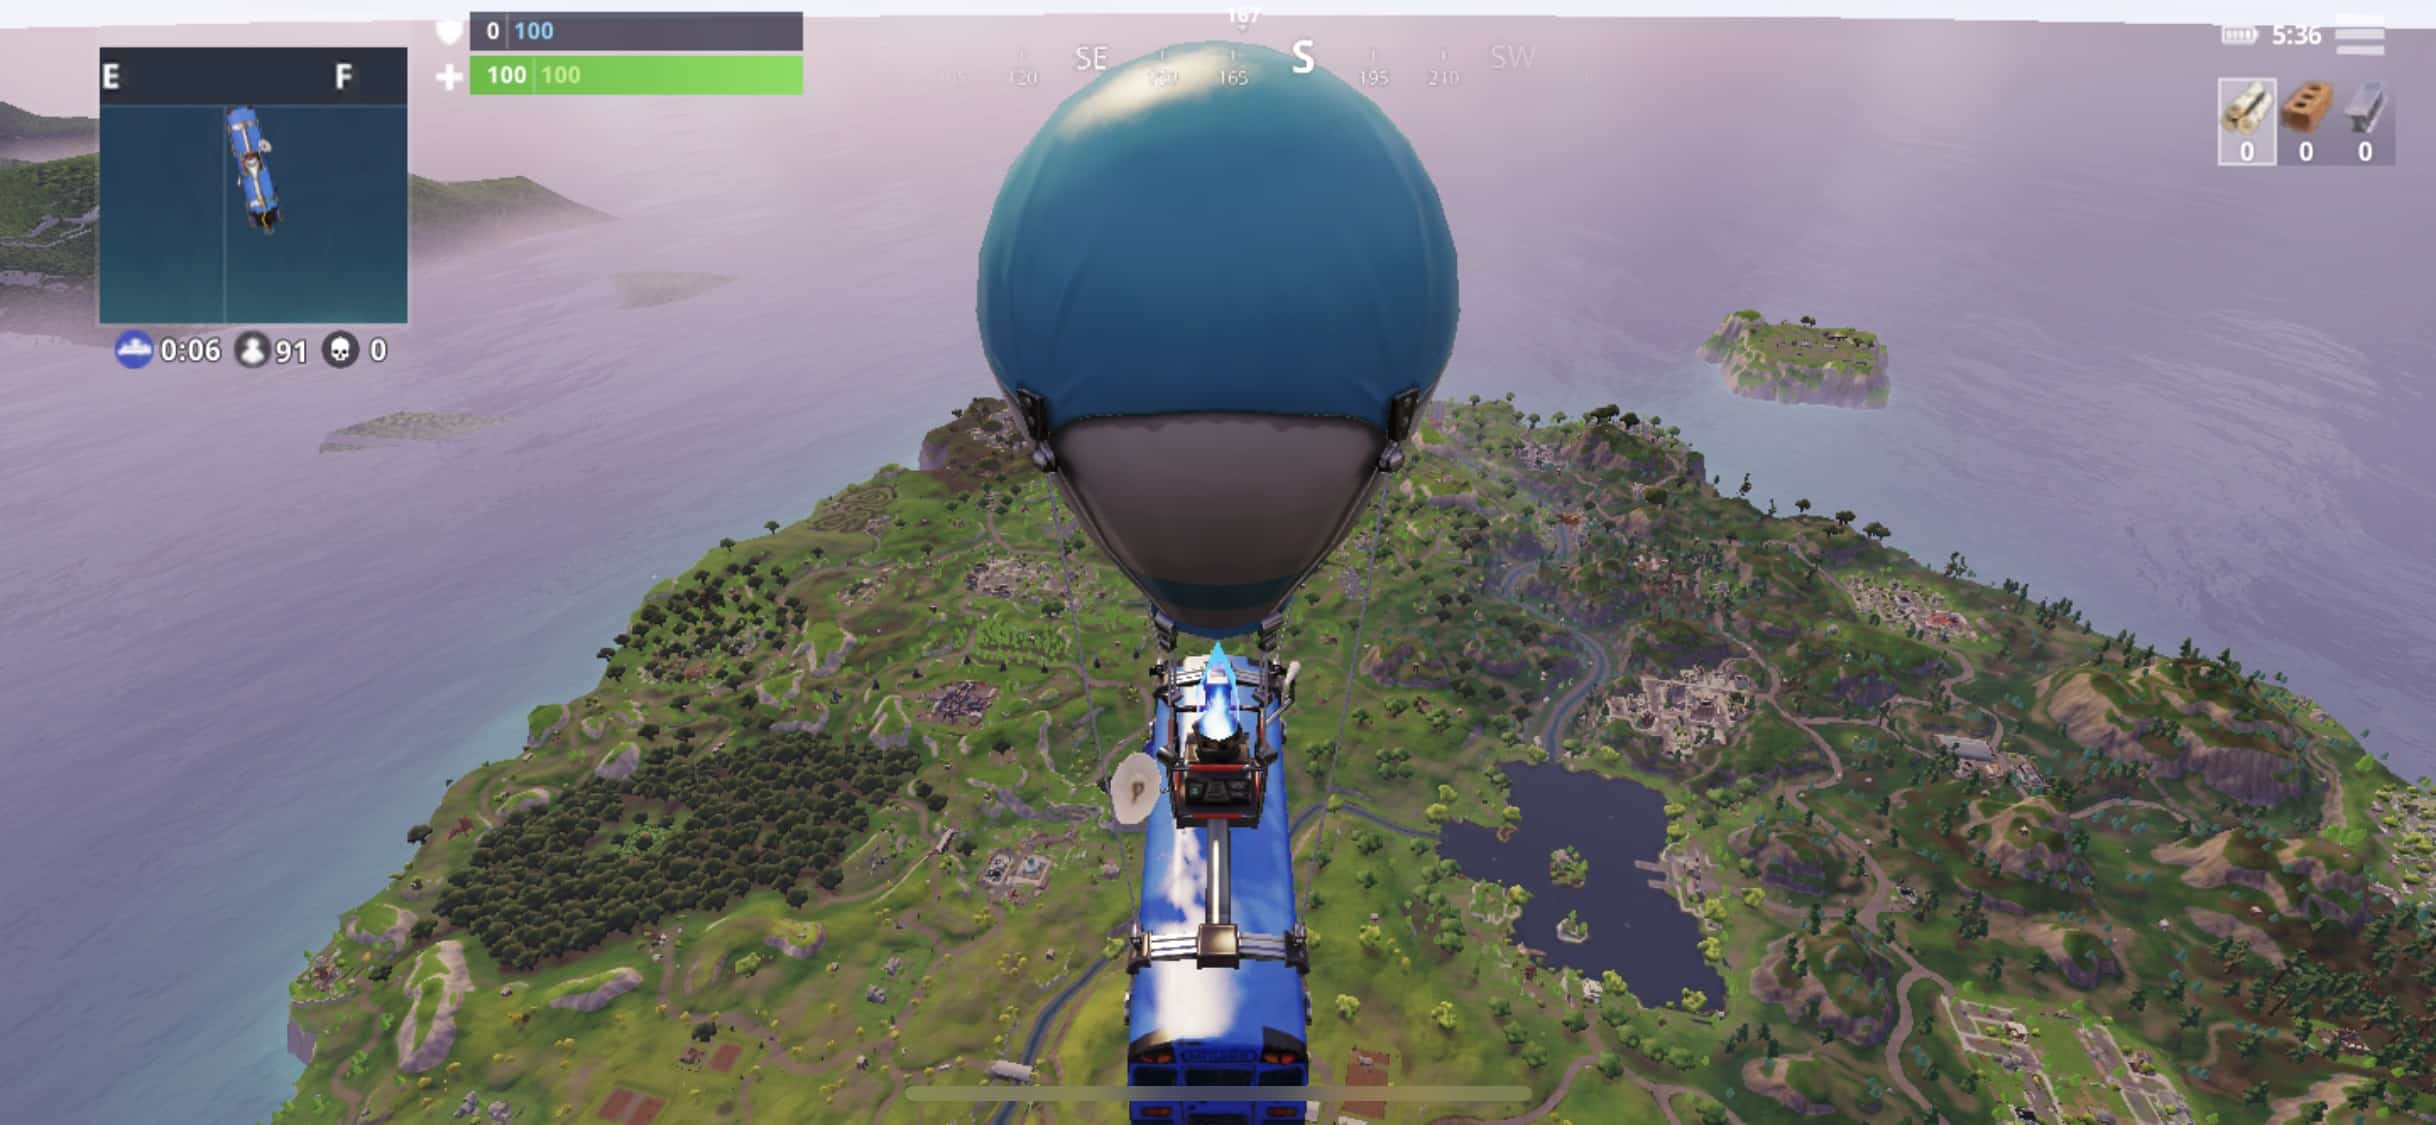 fortnite iphone riding the battle bus screenshot killian bell cult of mac - fortnite how to thank the bus driver on ios